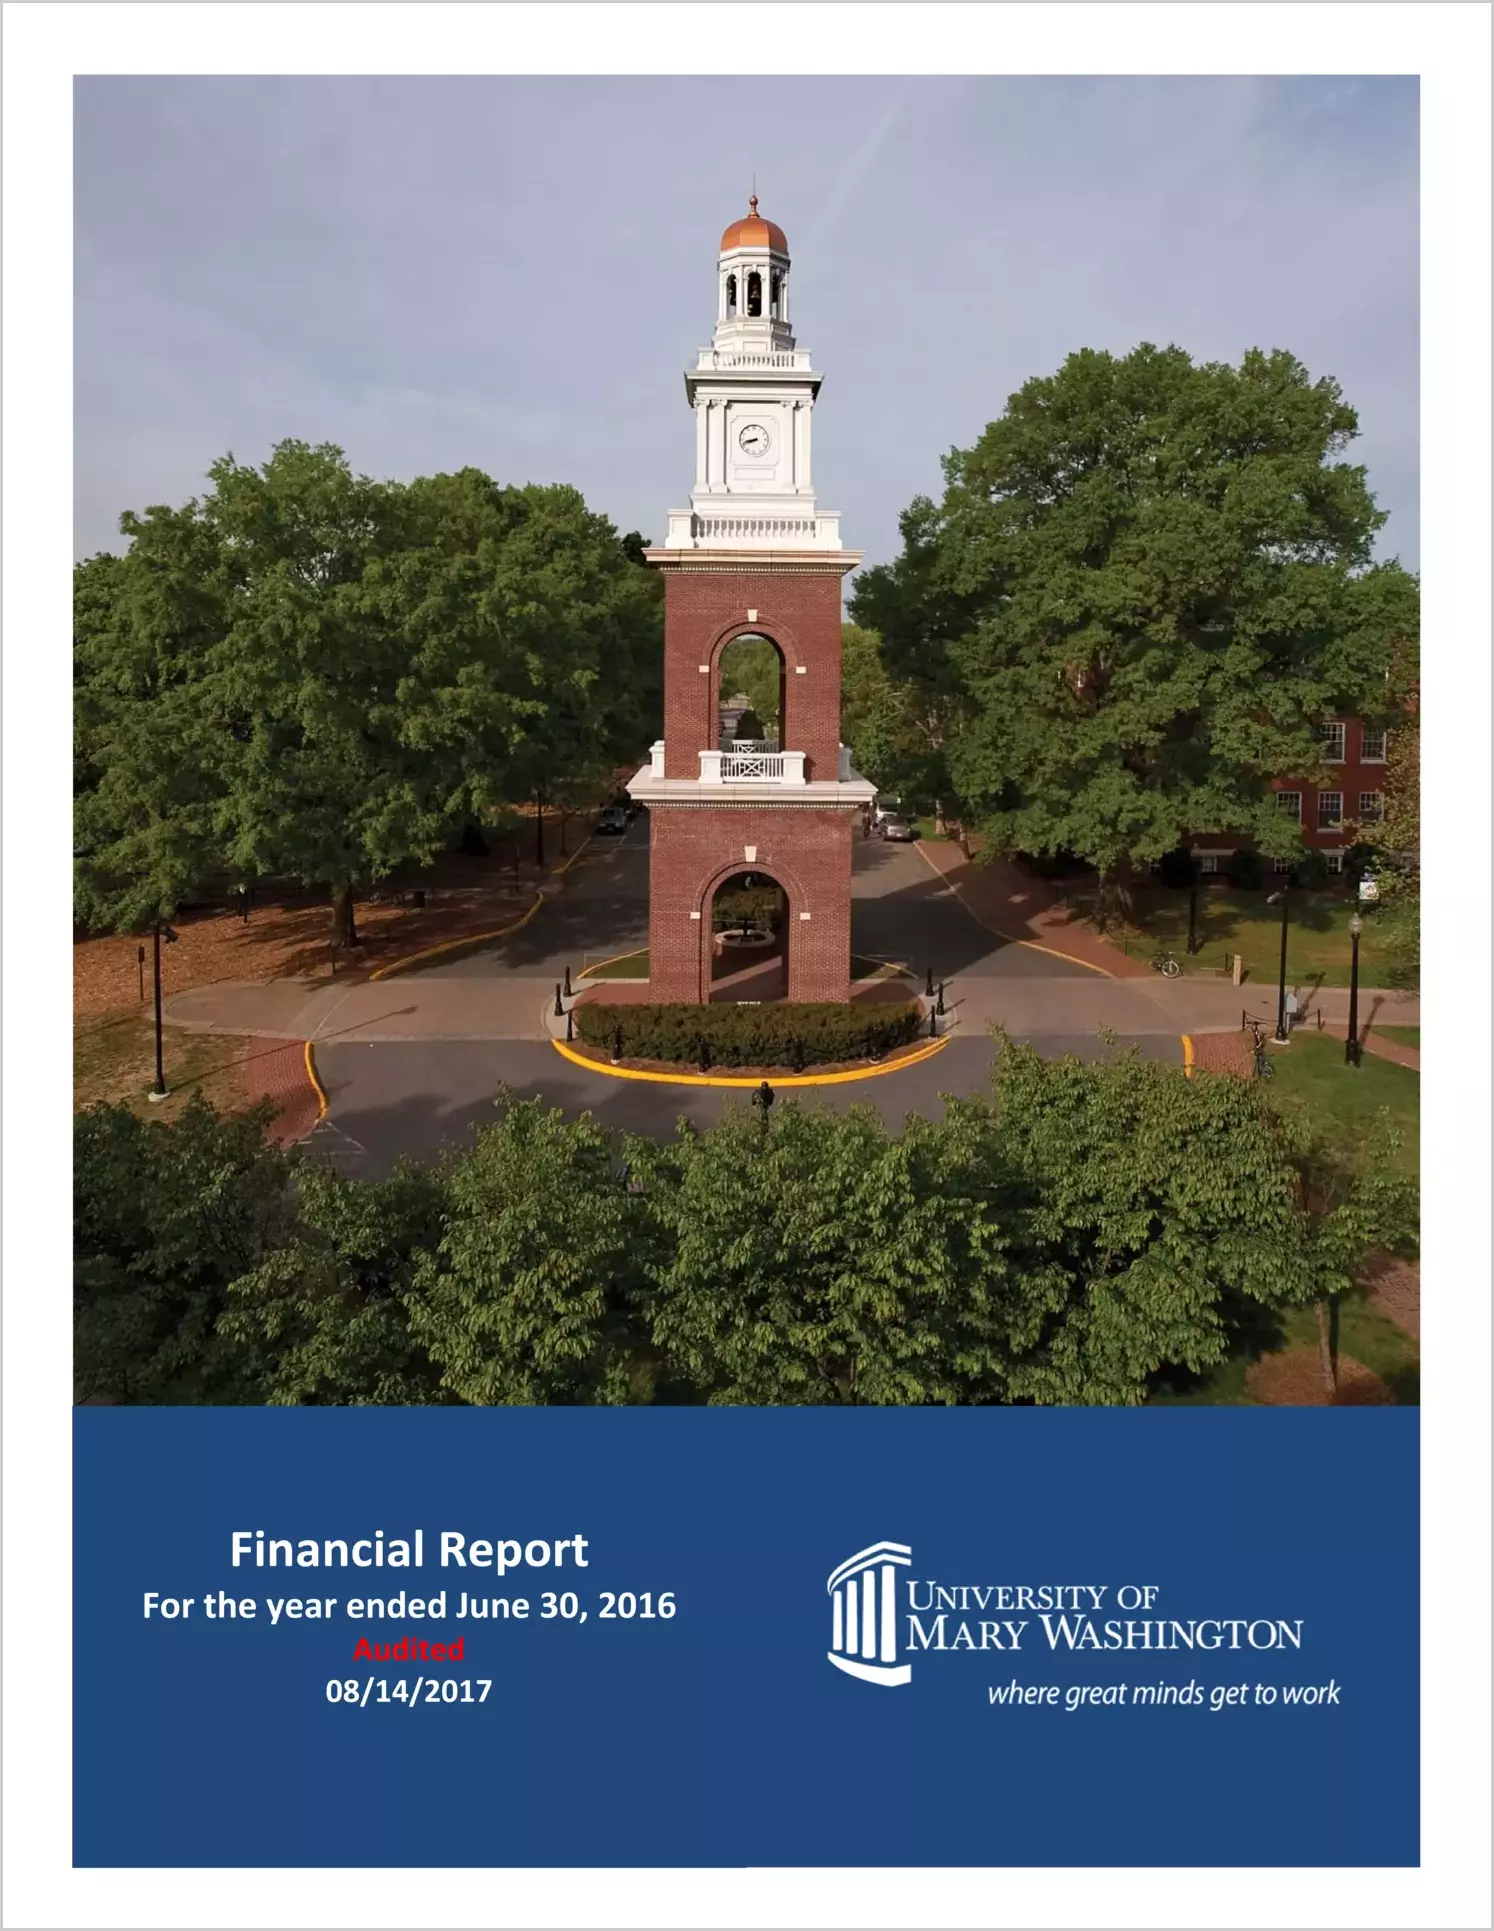 University of Mary Washington Financial Statements for the year ended June 30, 2016